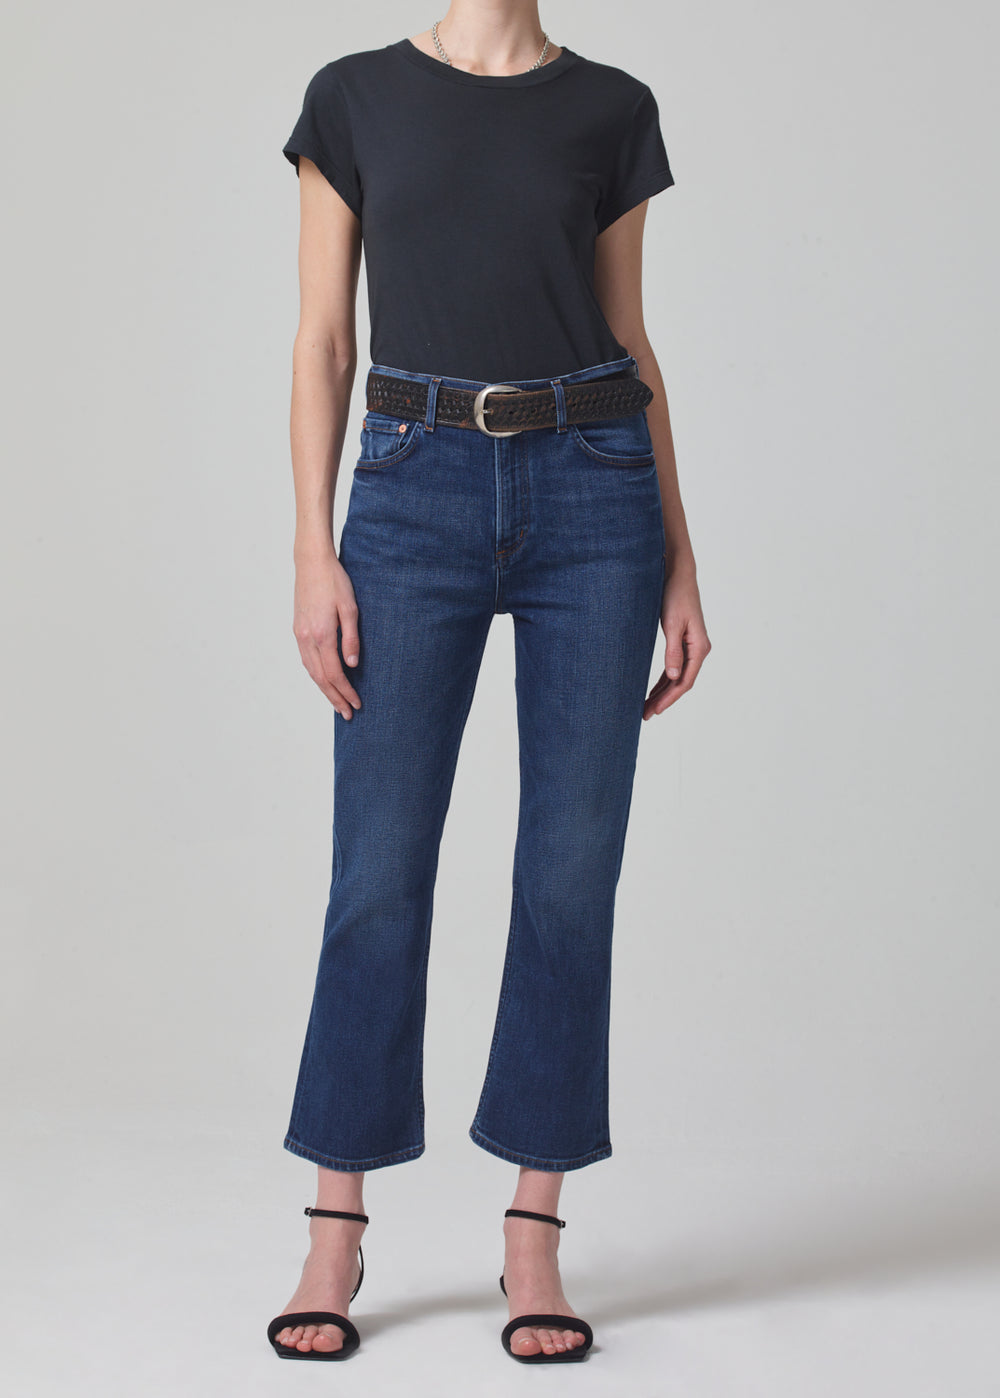 Citizens Of Humanity Isola Cropped Boot Cut Pant in Provance